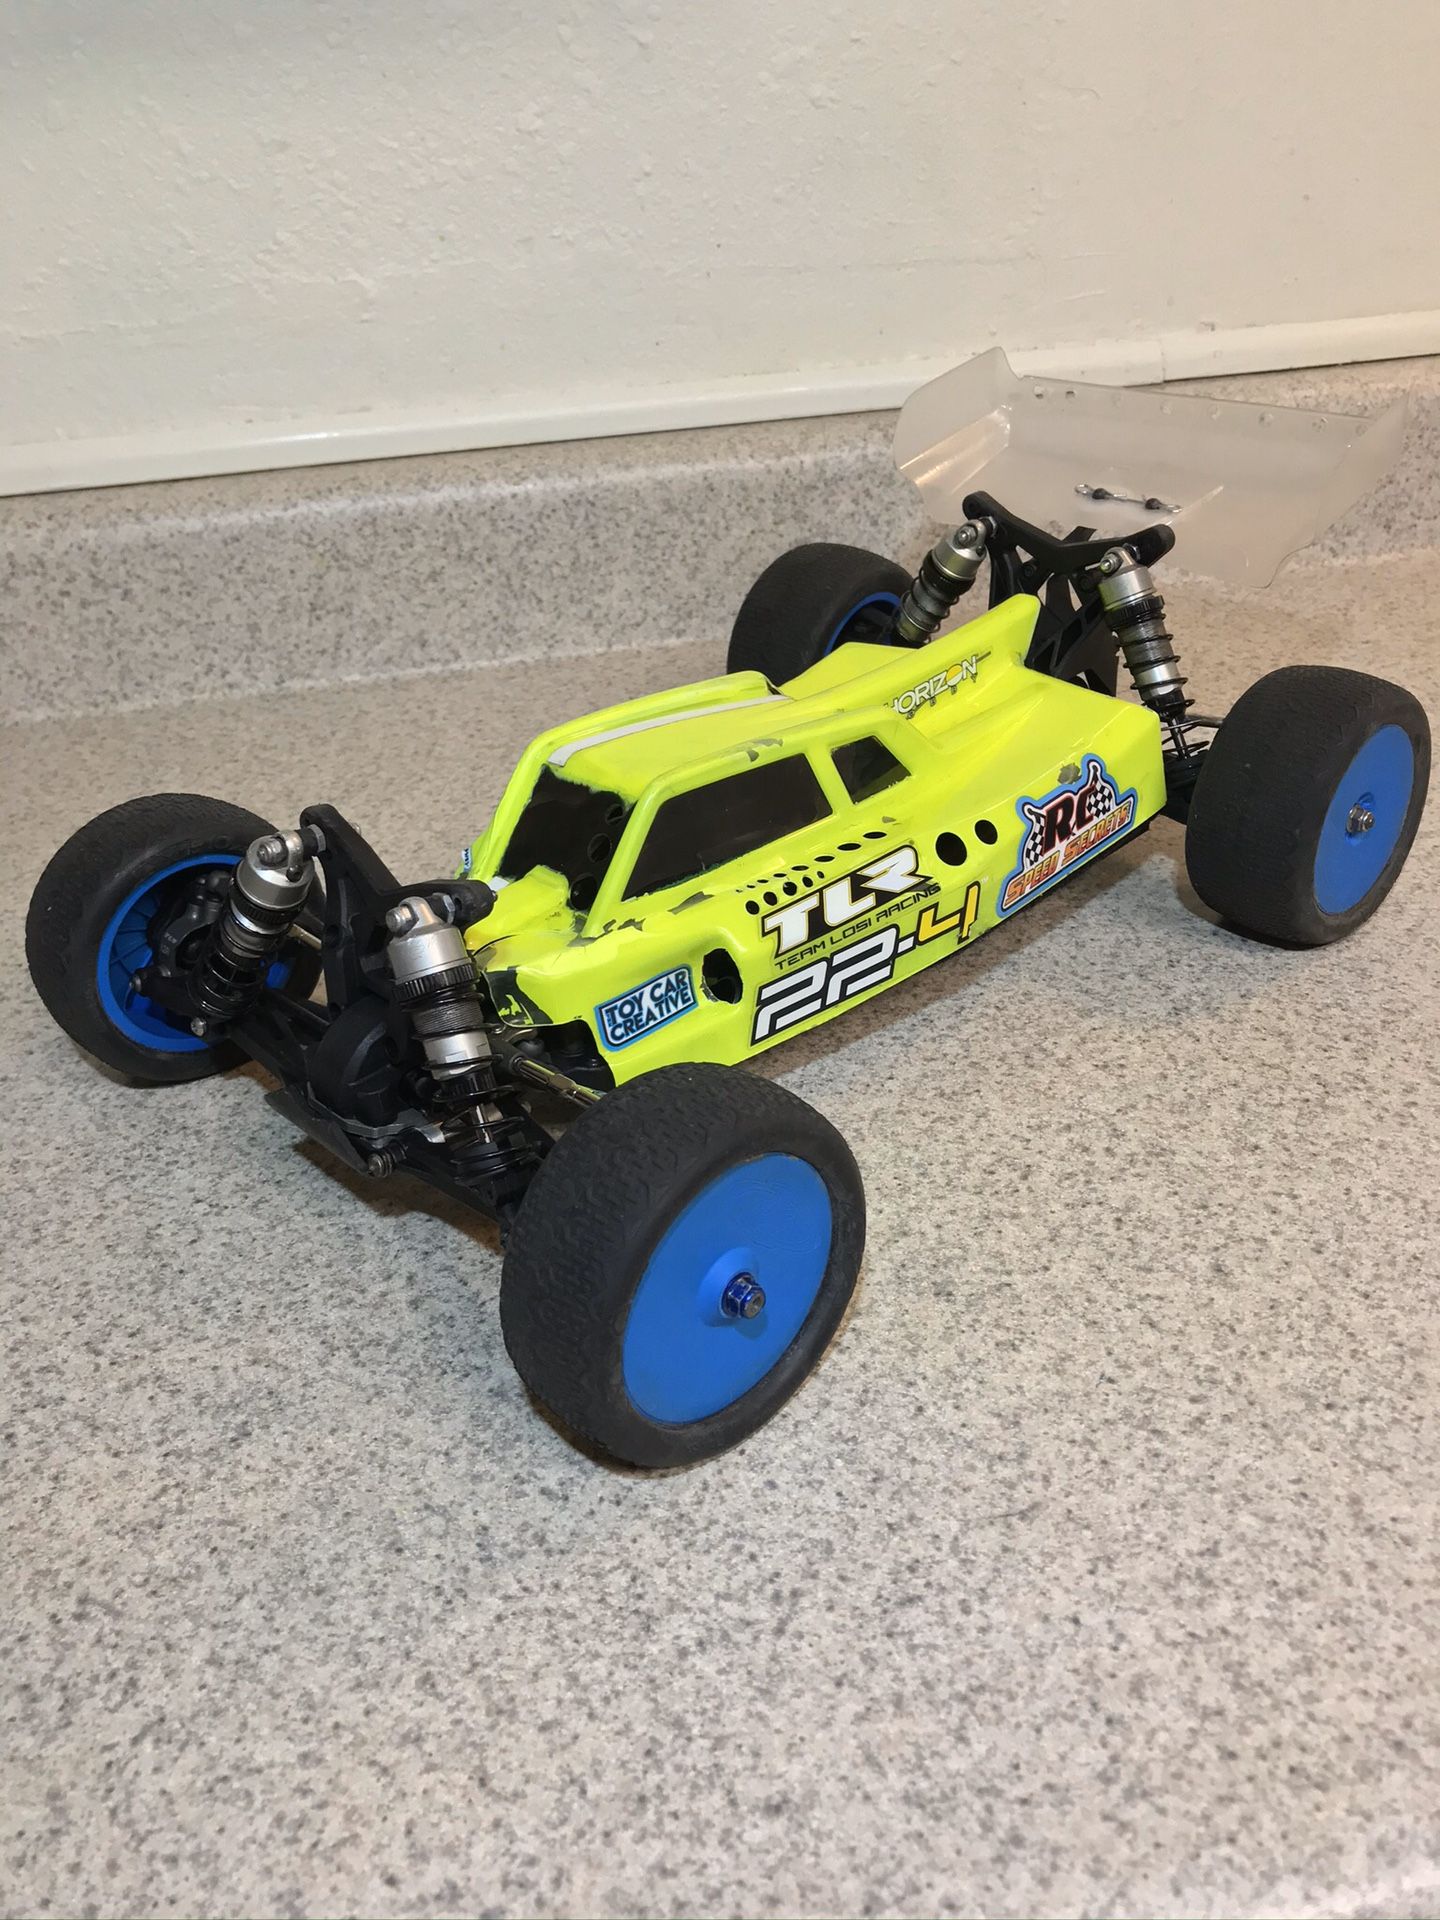 Rc Buggy (Team Losi) “22-4 3.0” 4x4 RTR